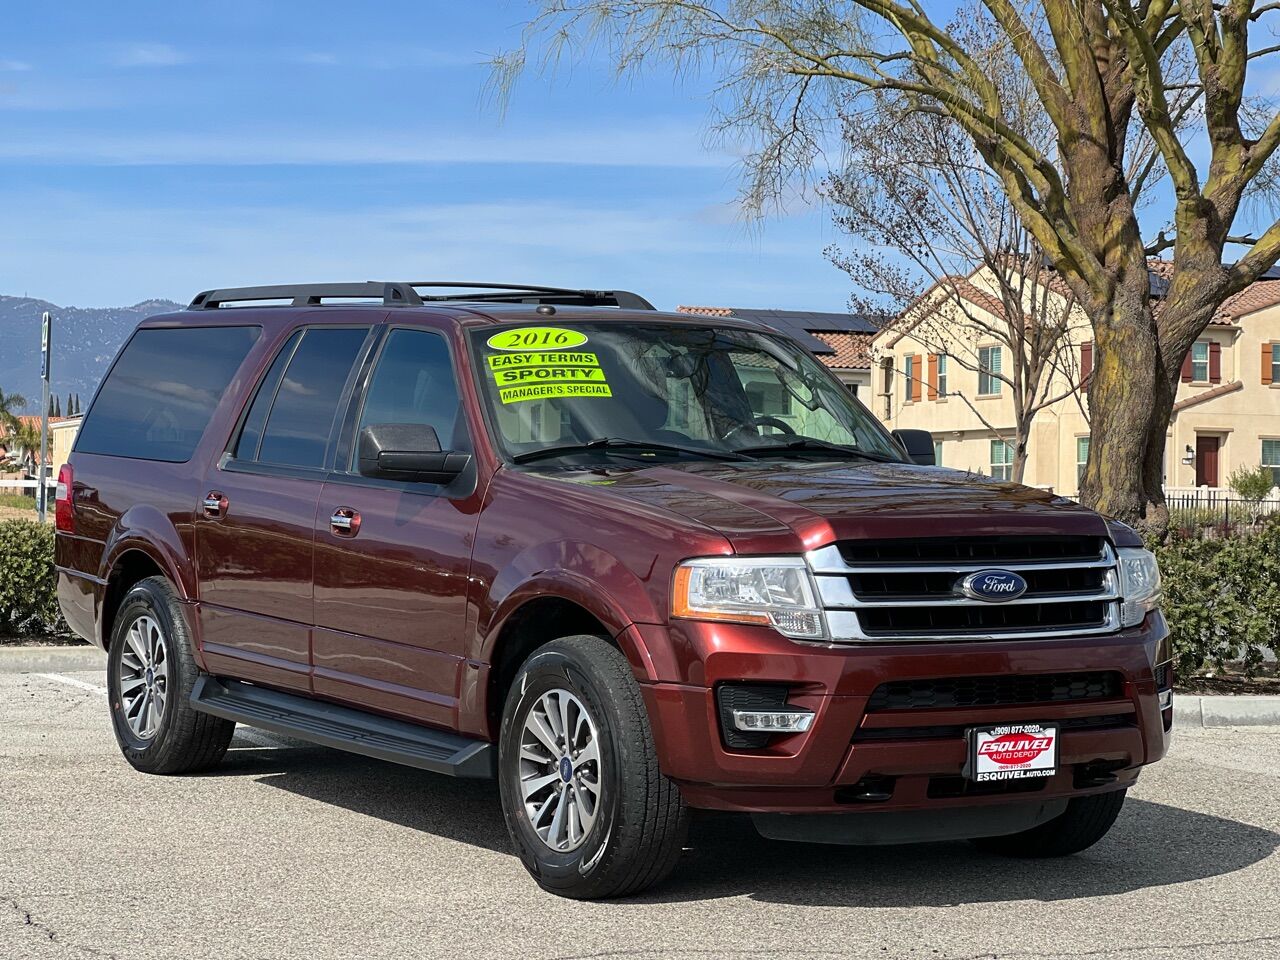 2016 Ford Expedition For Sale - Carsforsale.com®